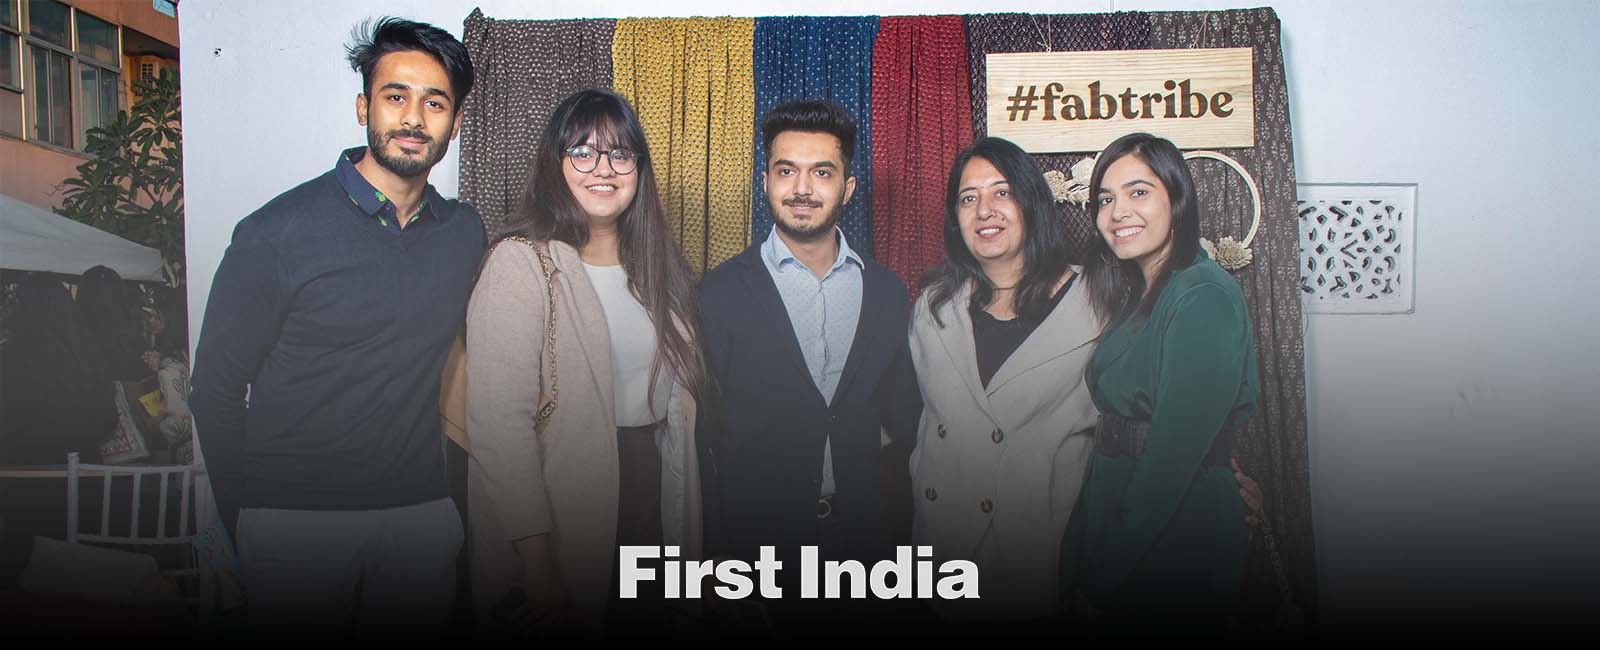 THE FAB TALK - First India - Fabriclore